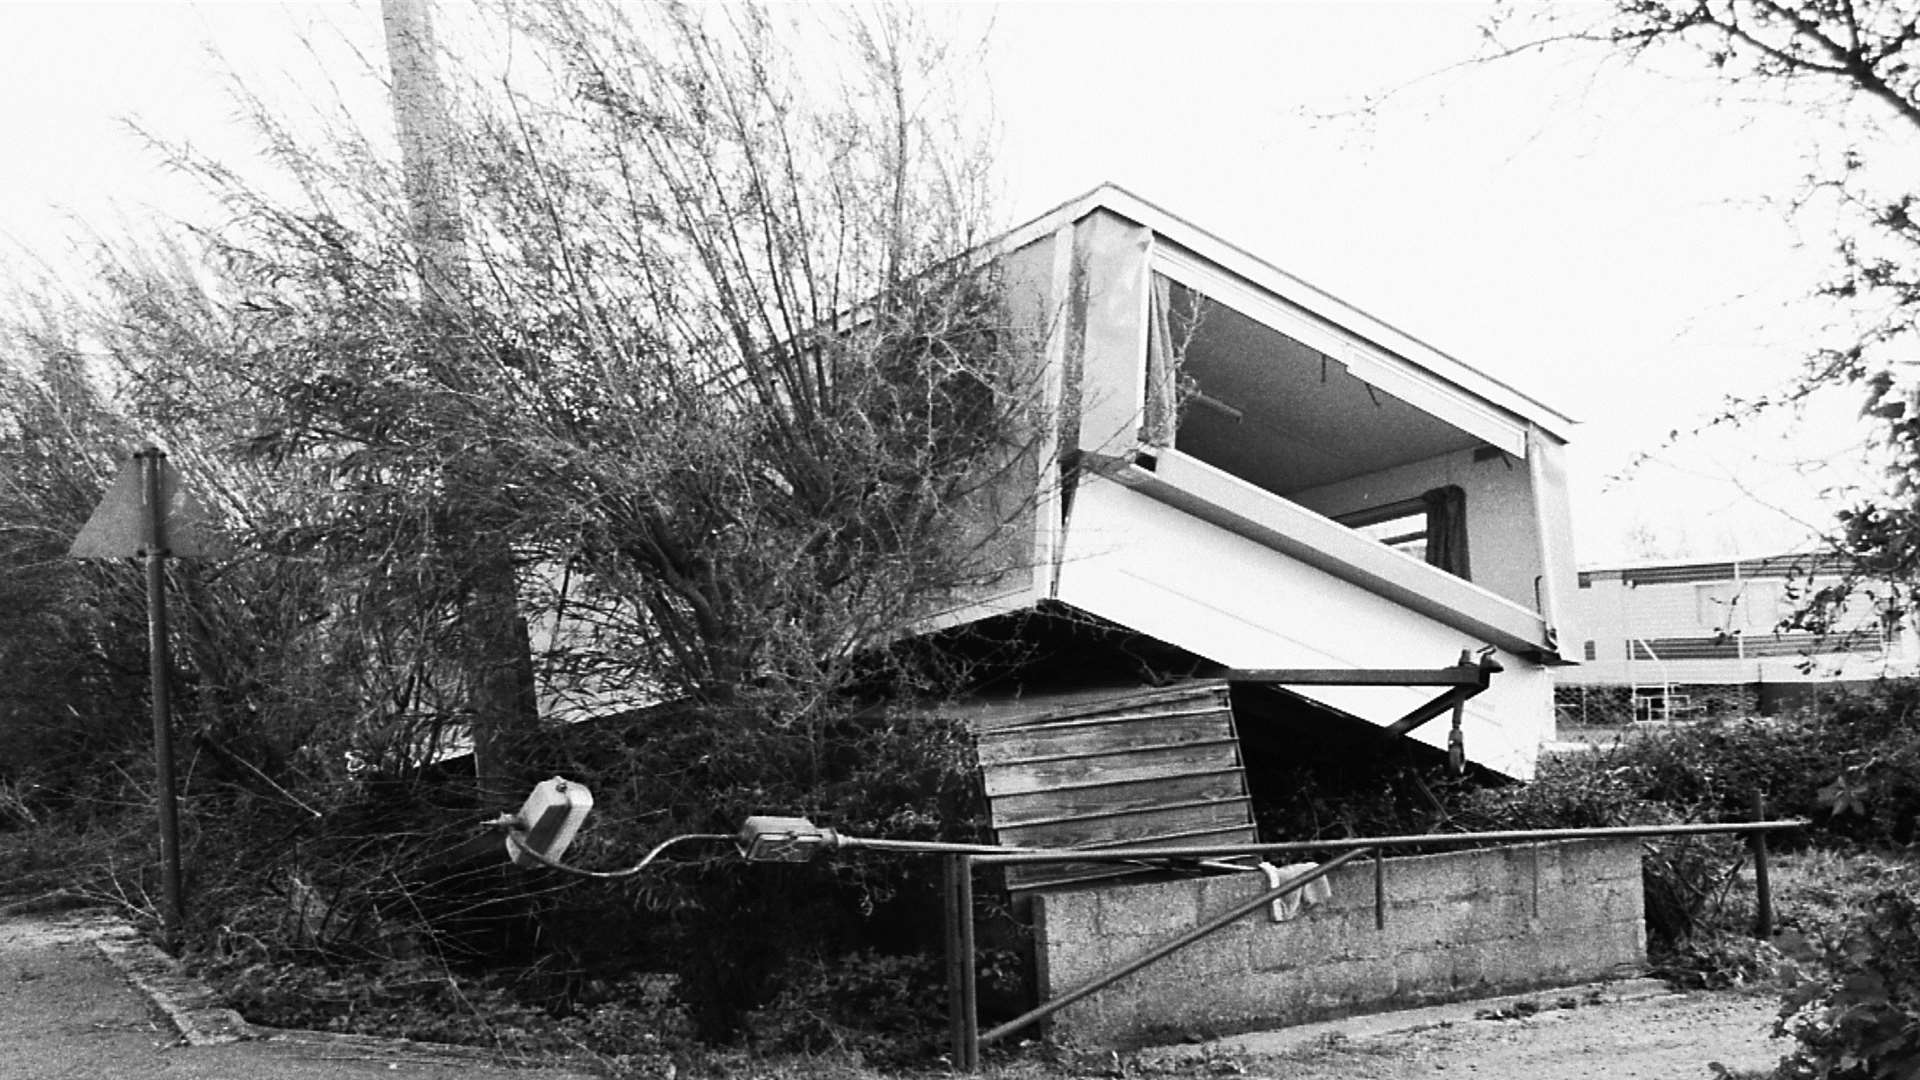 One of the many mobile homes wrecked in 1987.